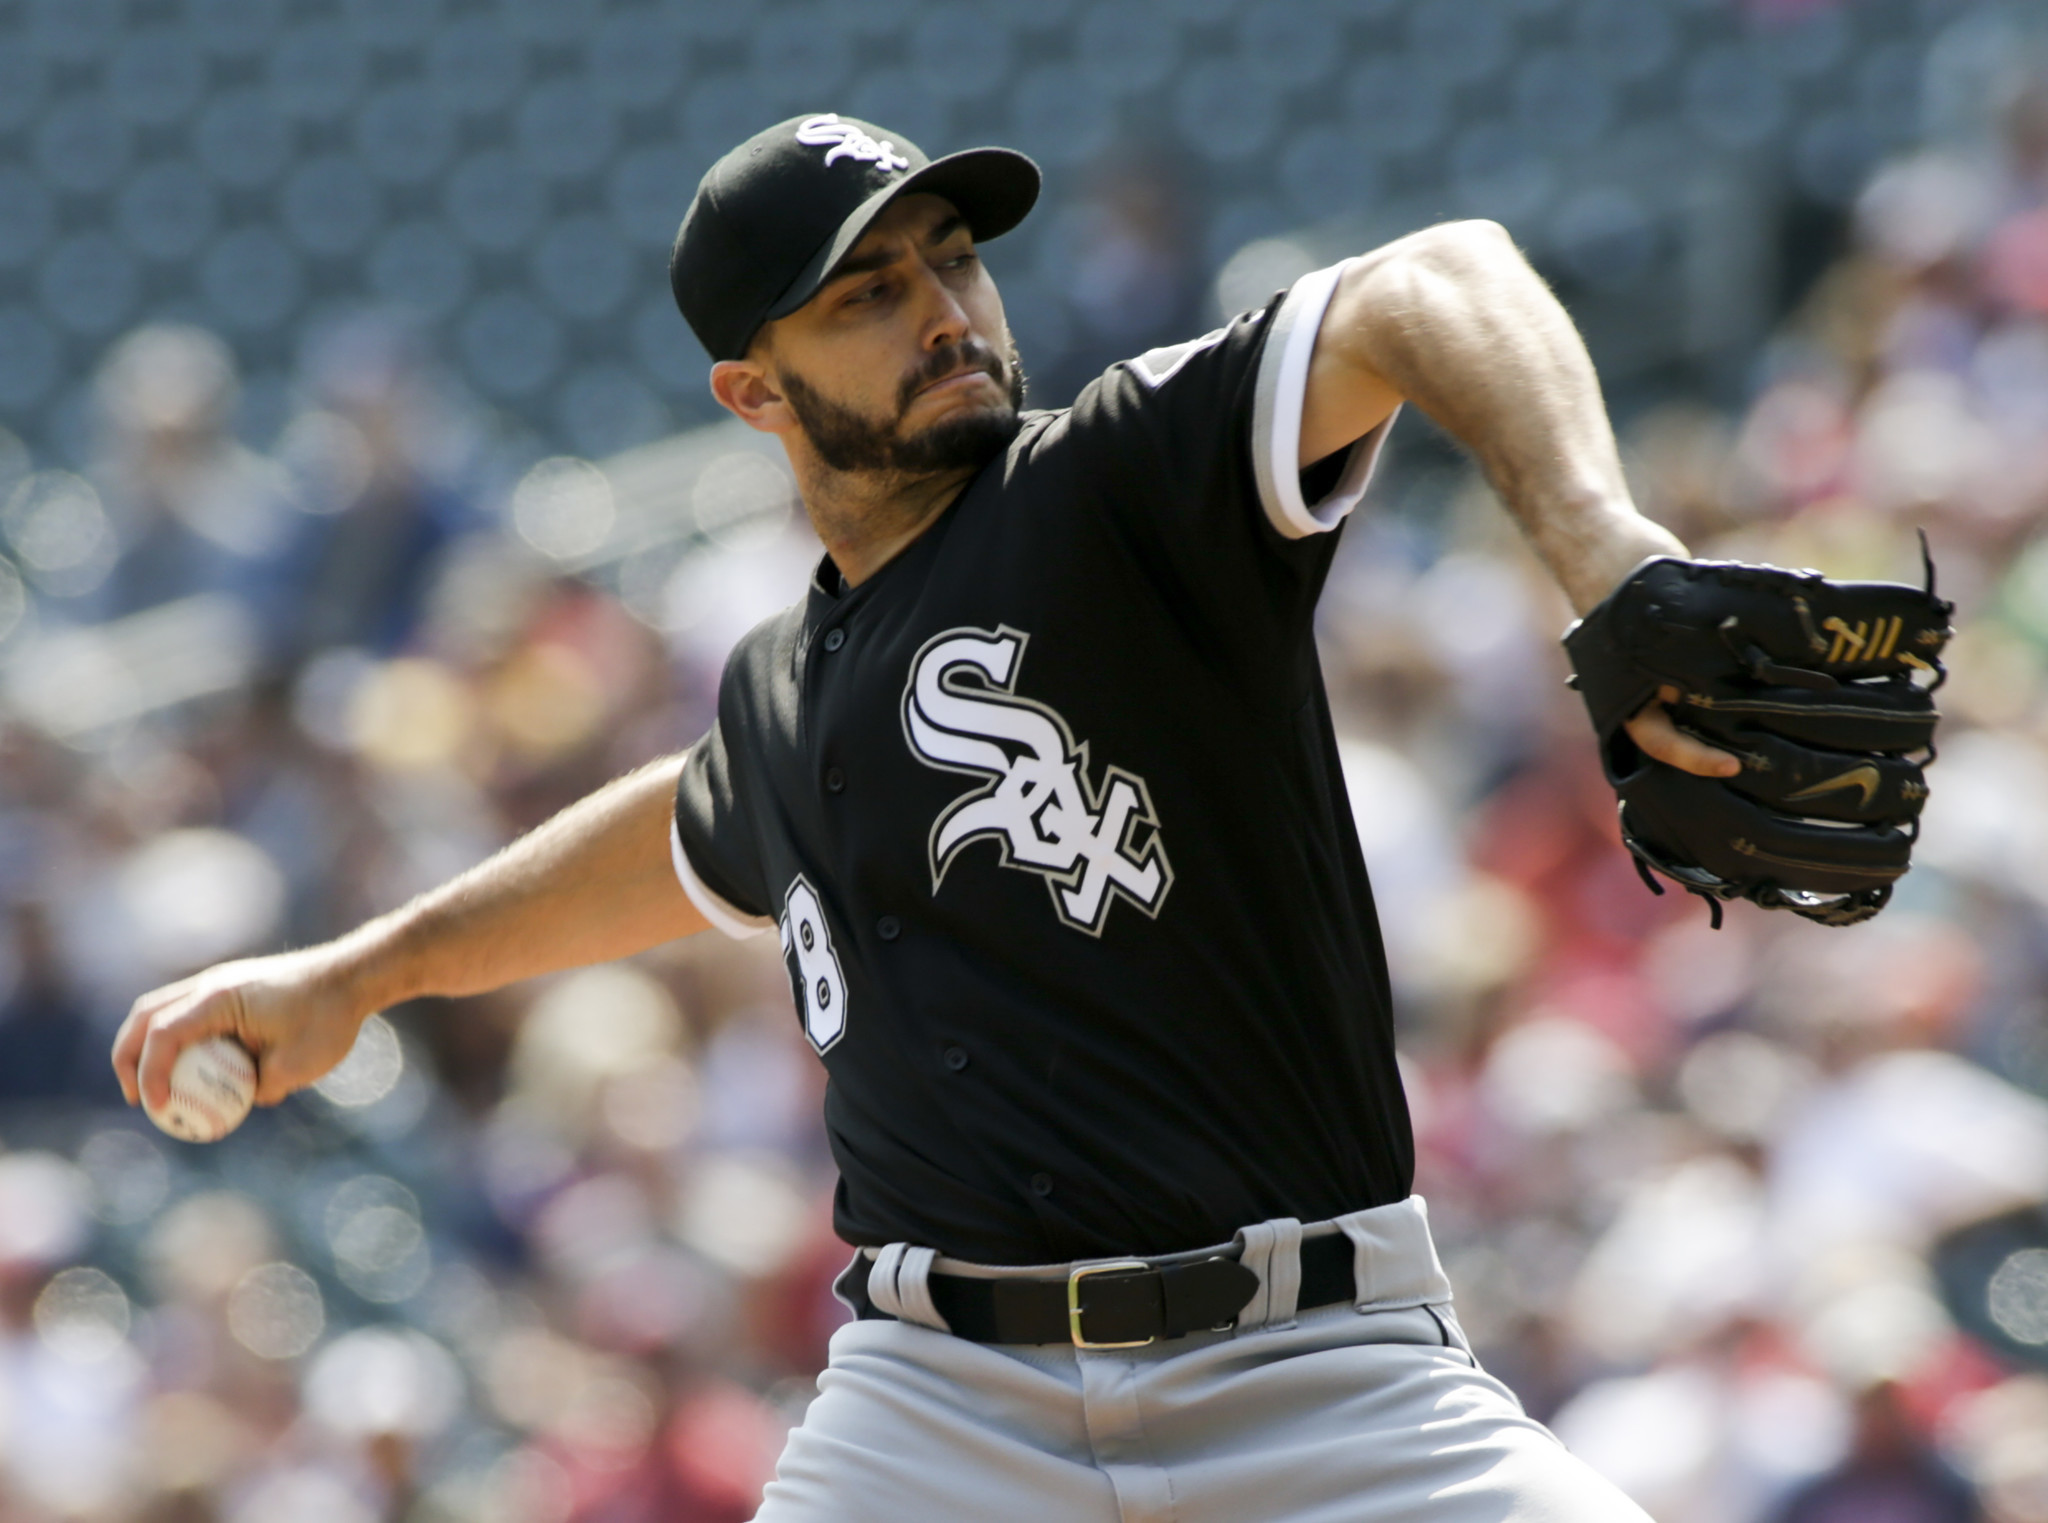 White Sox trade pitcher Miguel Gonzalez to Rangers for minor leaguer ...